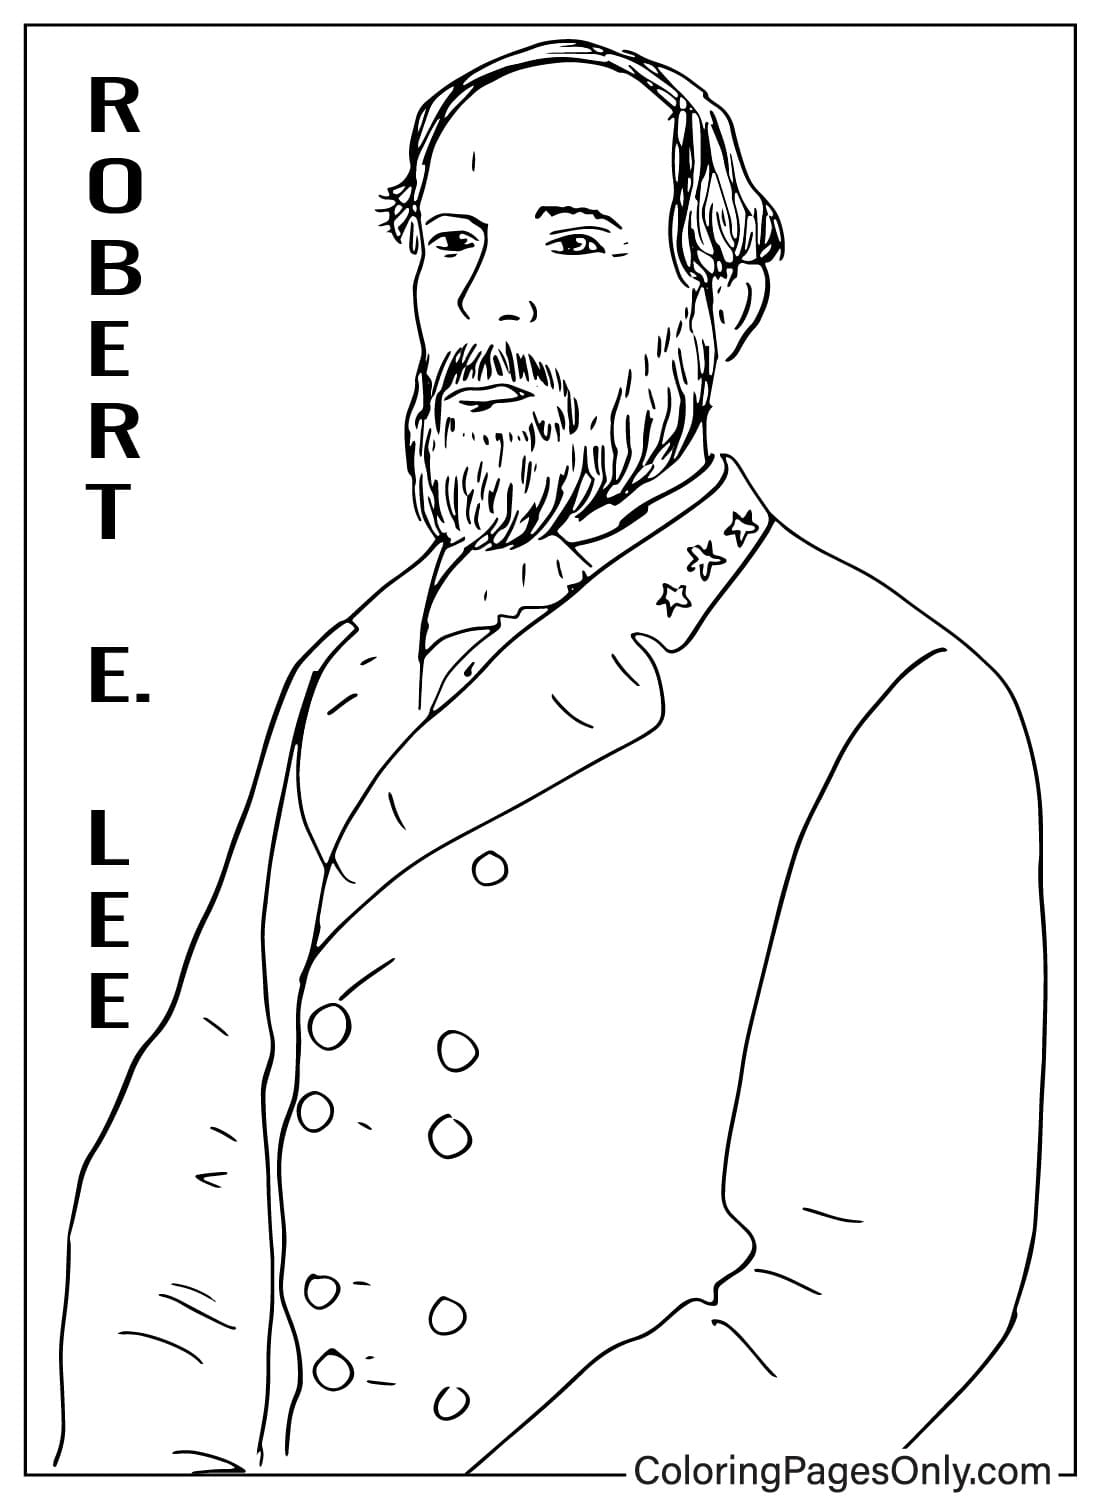 Robert E. Lee Drawing Coloring Page from Robert E. Lee